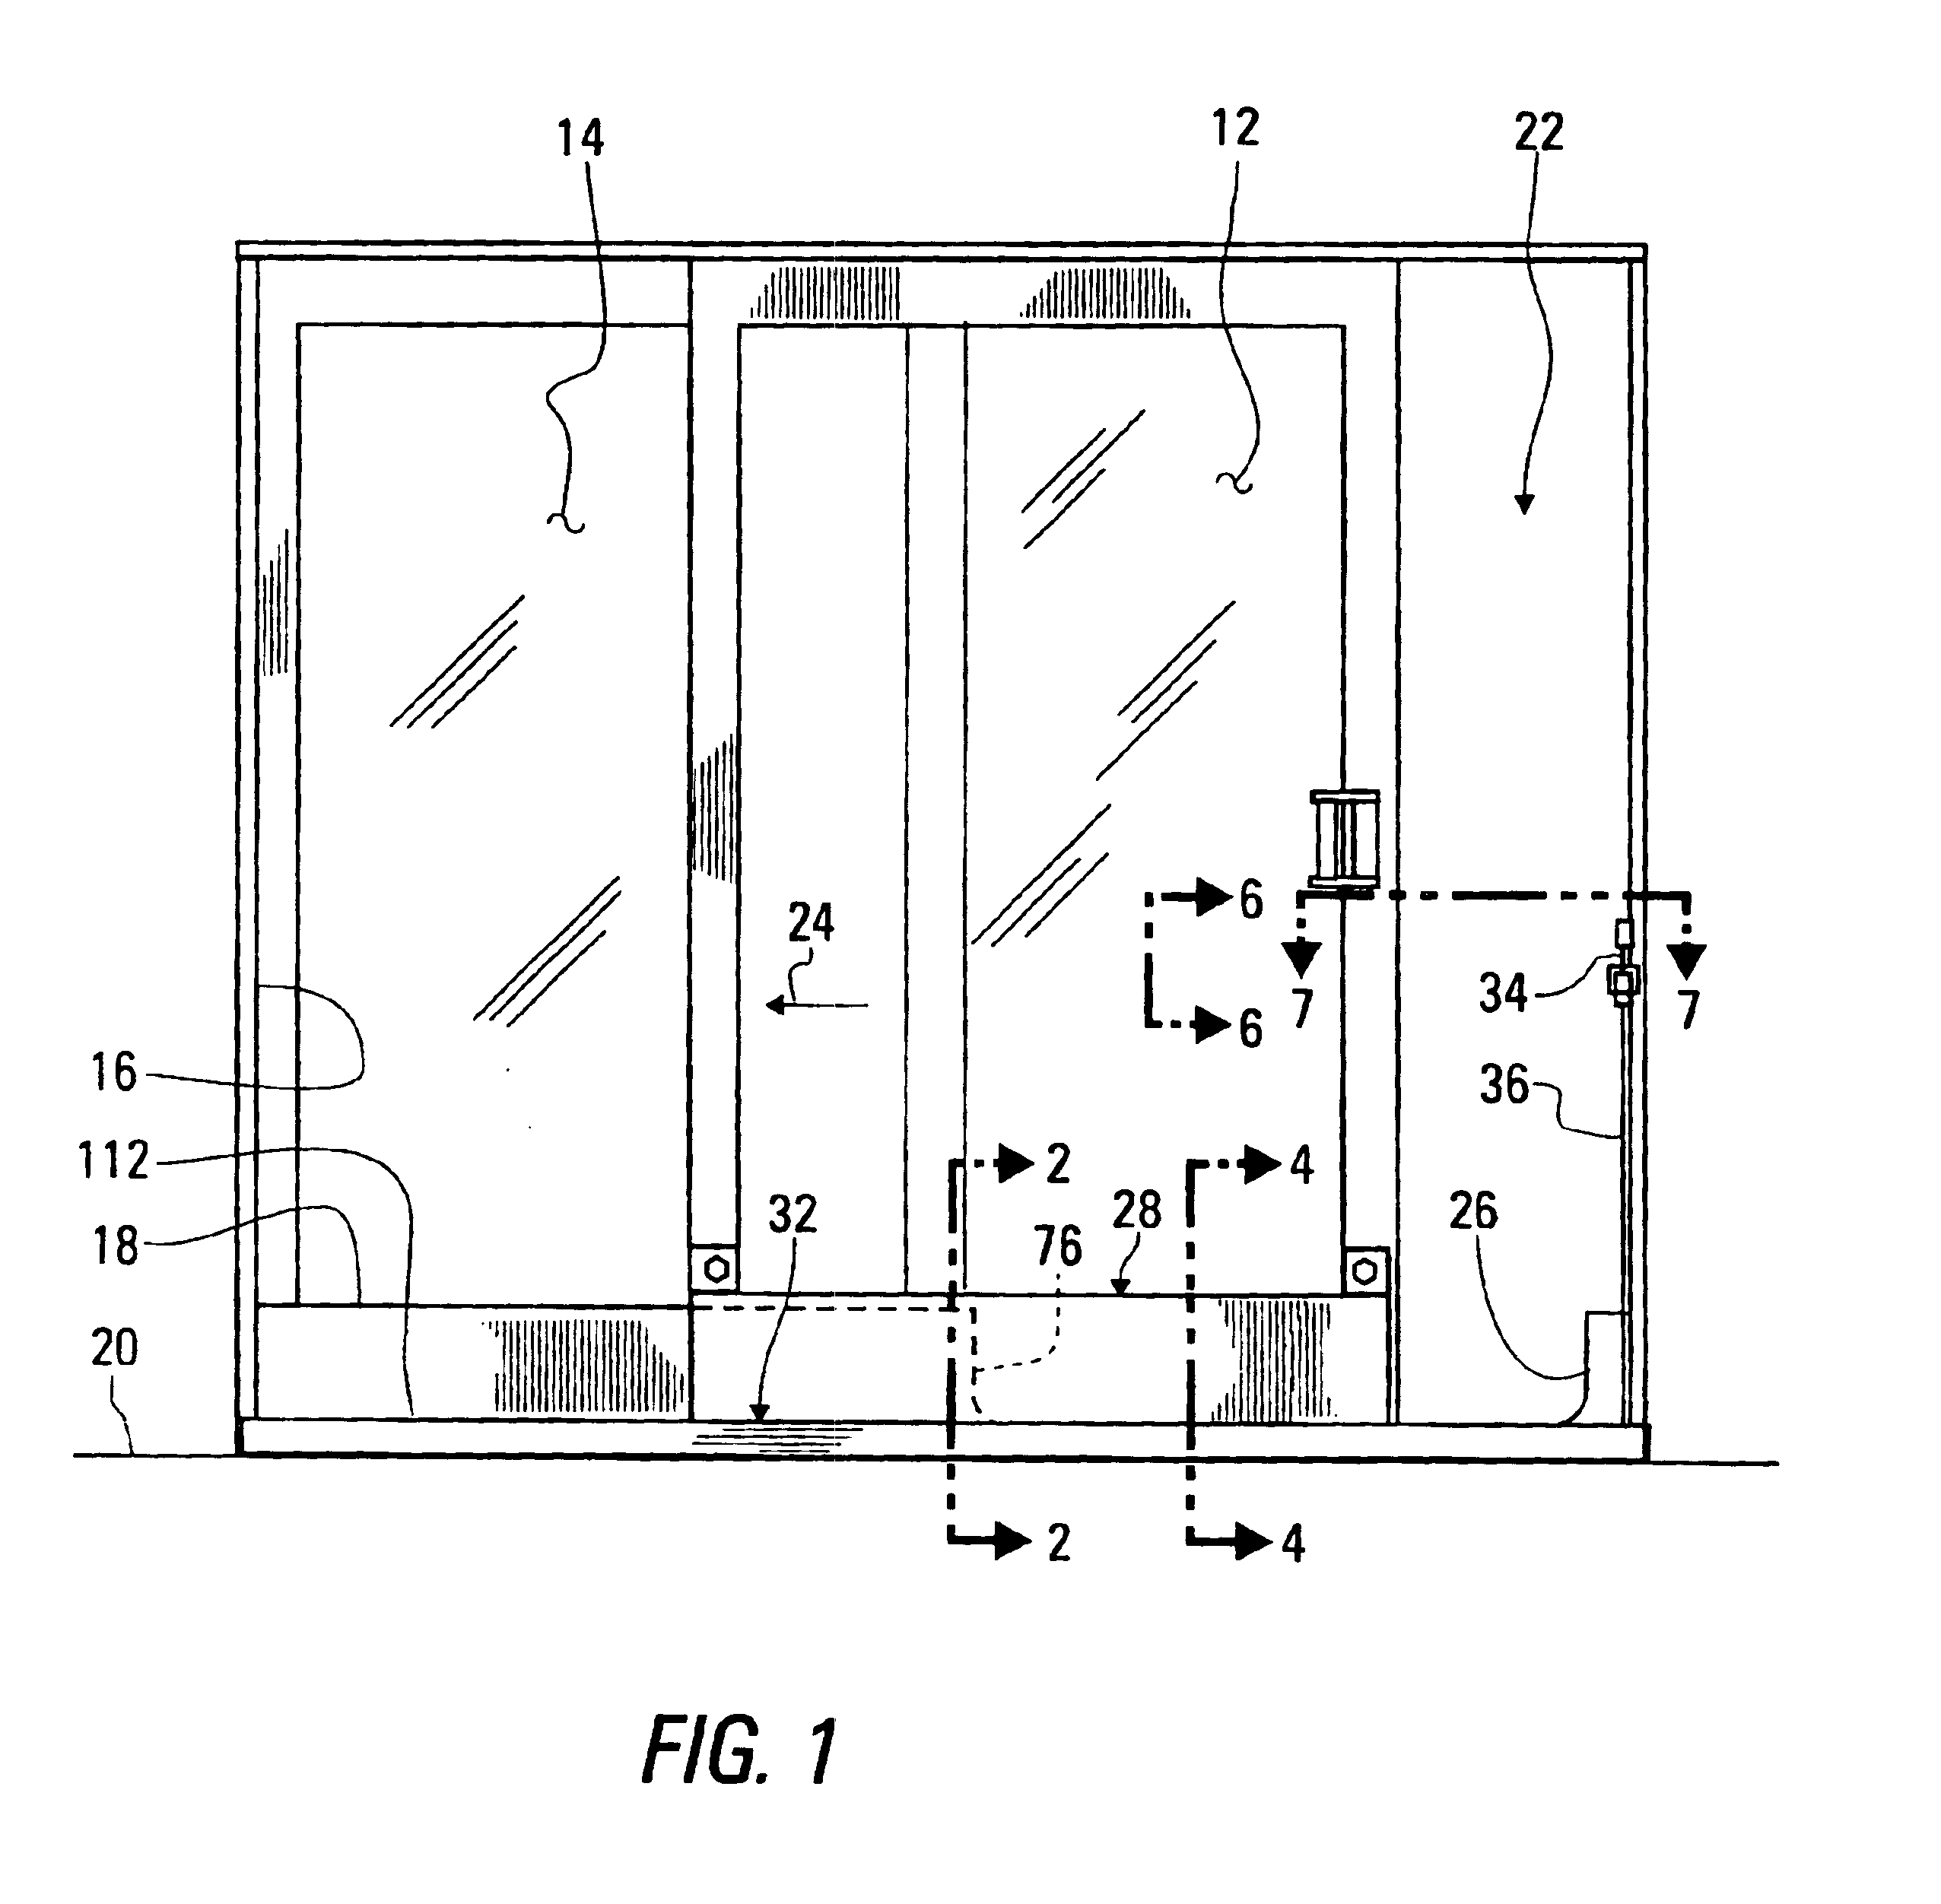 Apparatus moving with a sliding door to provide an unobstructed passageway and to seal a notch within a watertight barrier